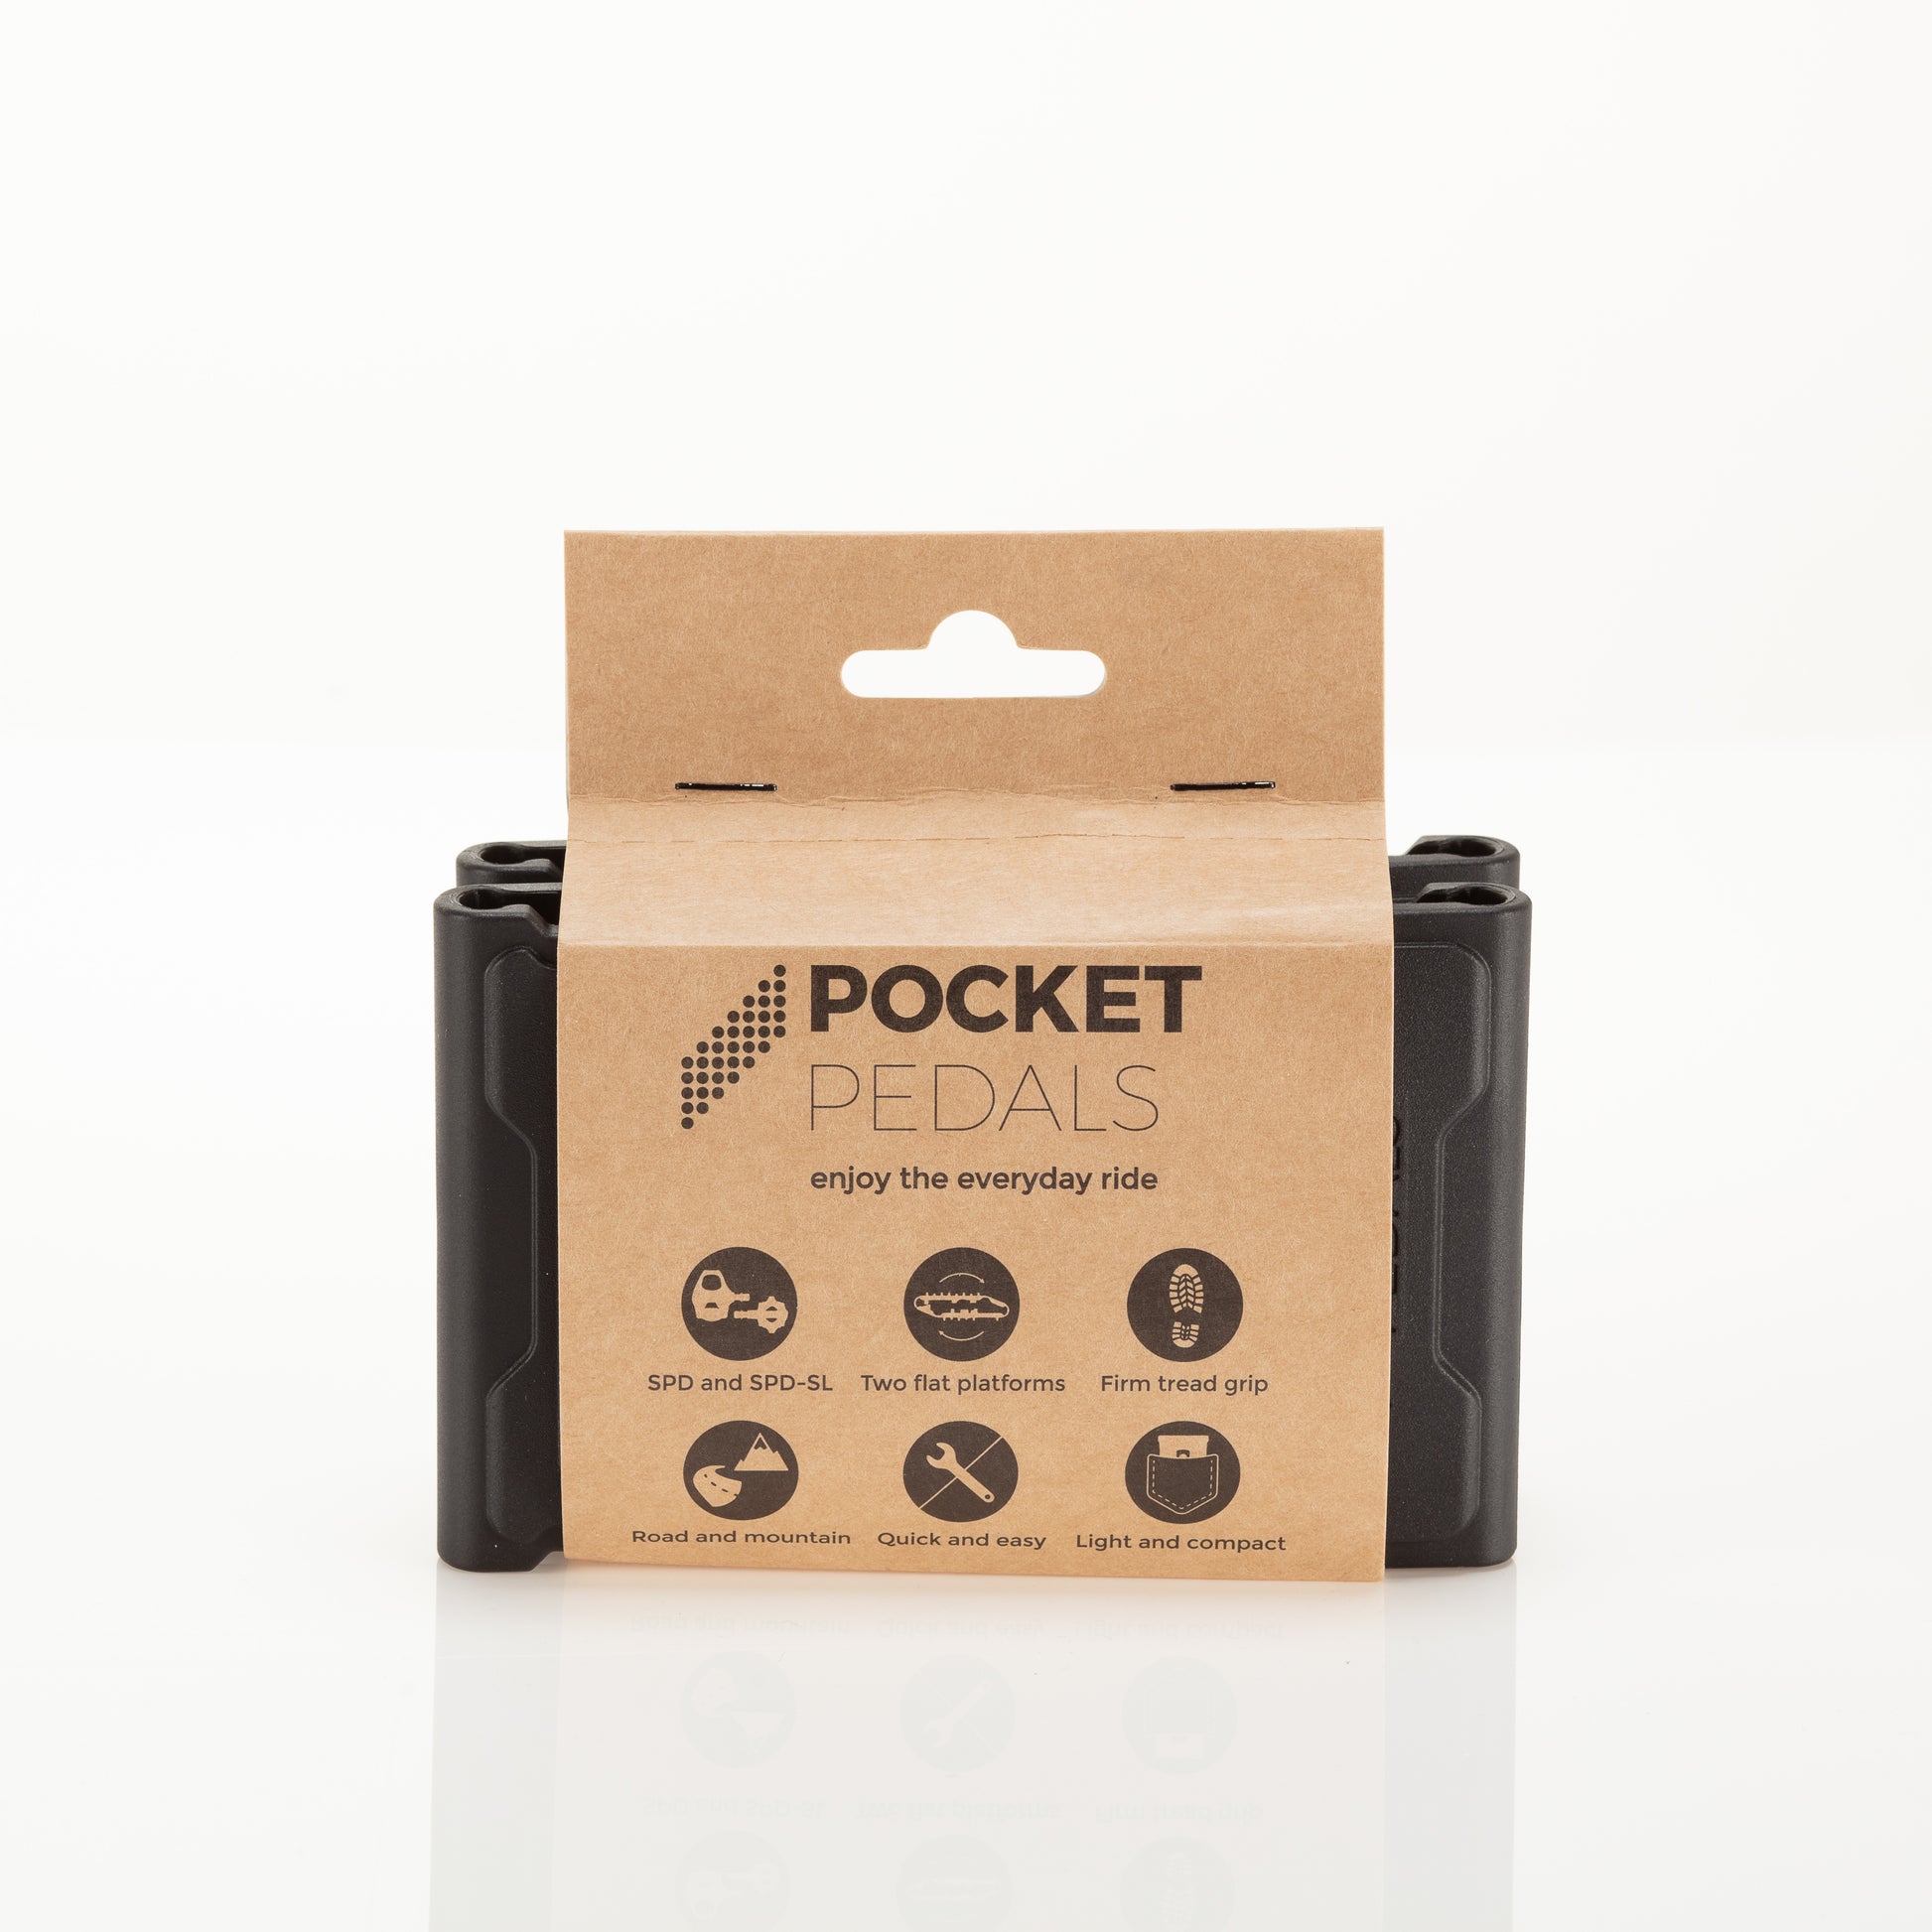 Pocket Pedals clipless pedal adapters in packaging